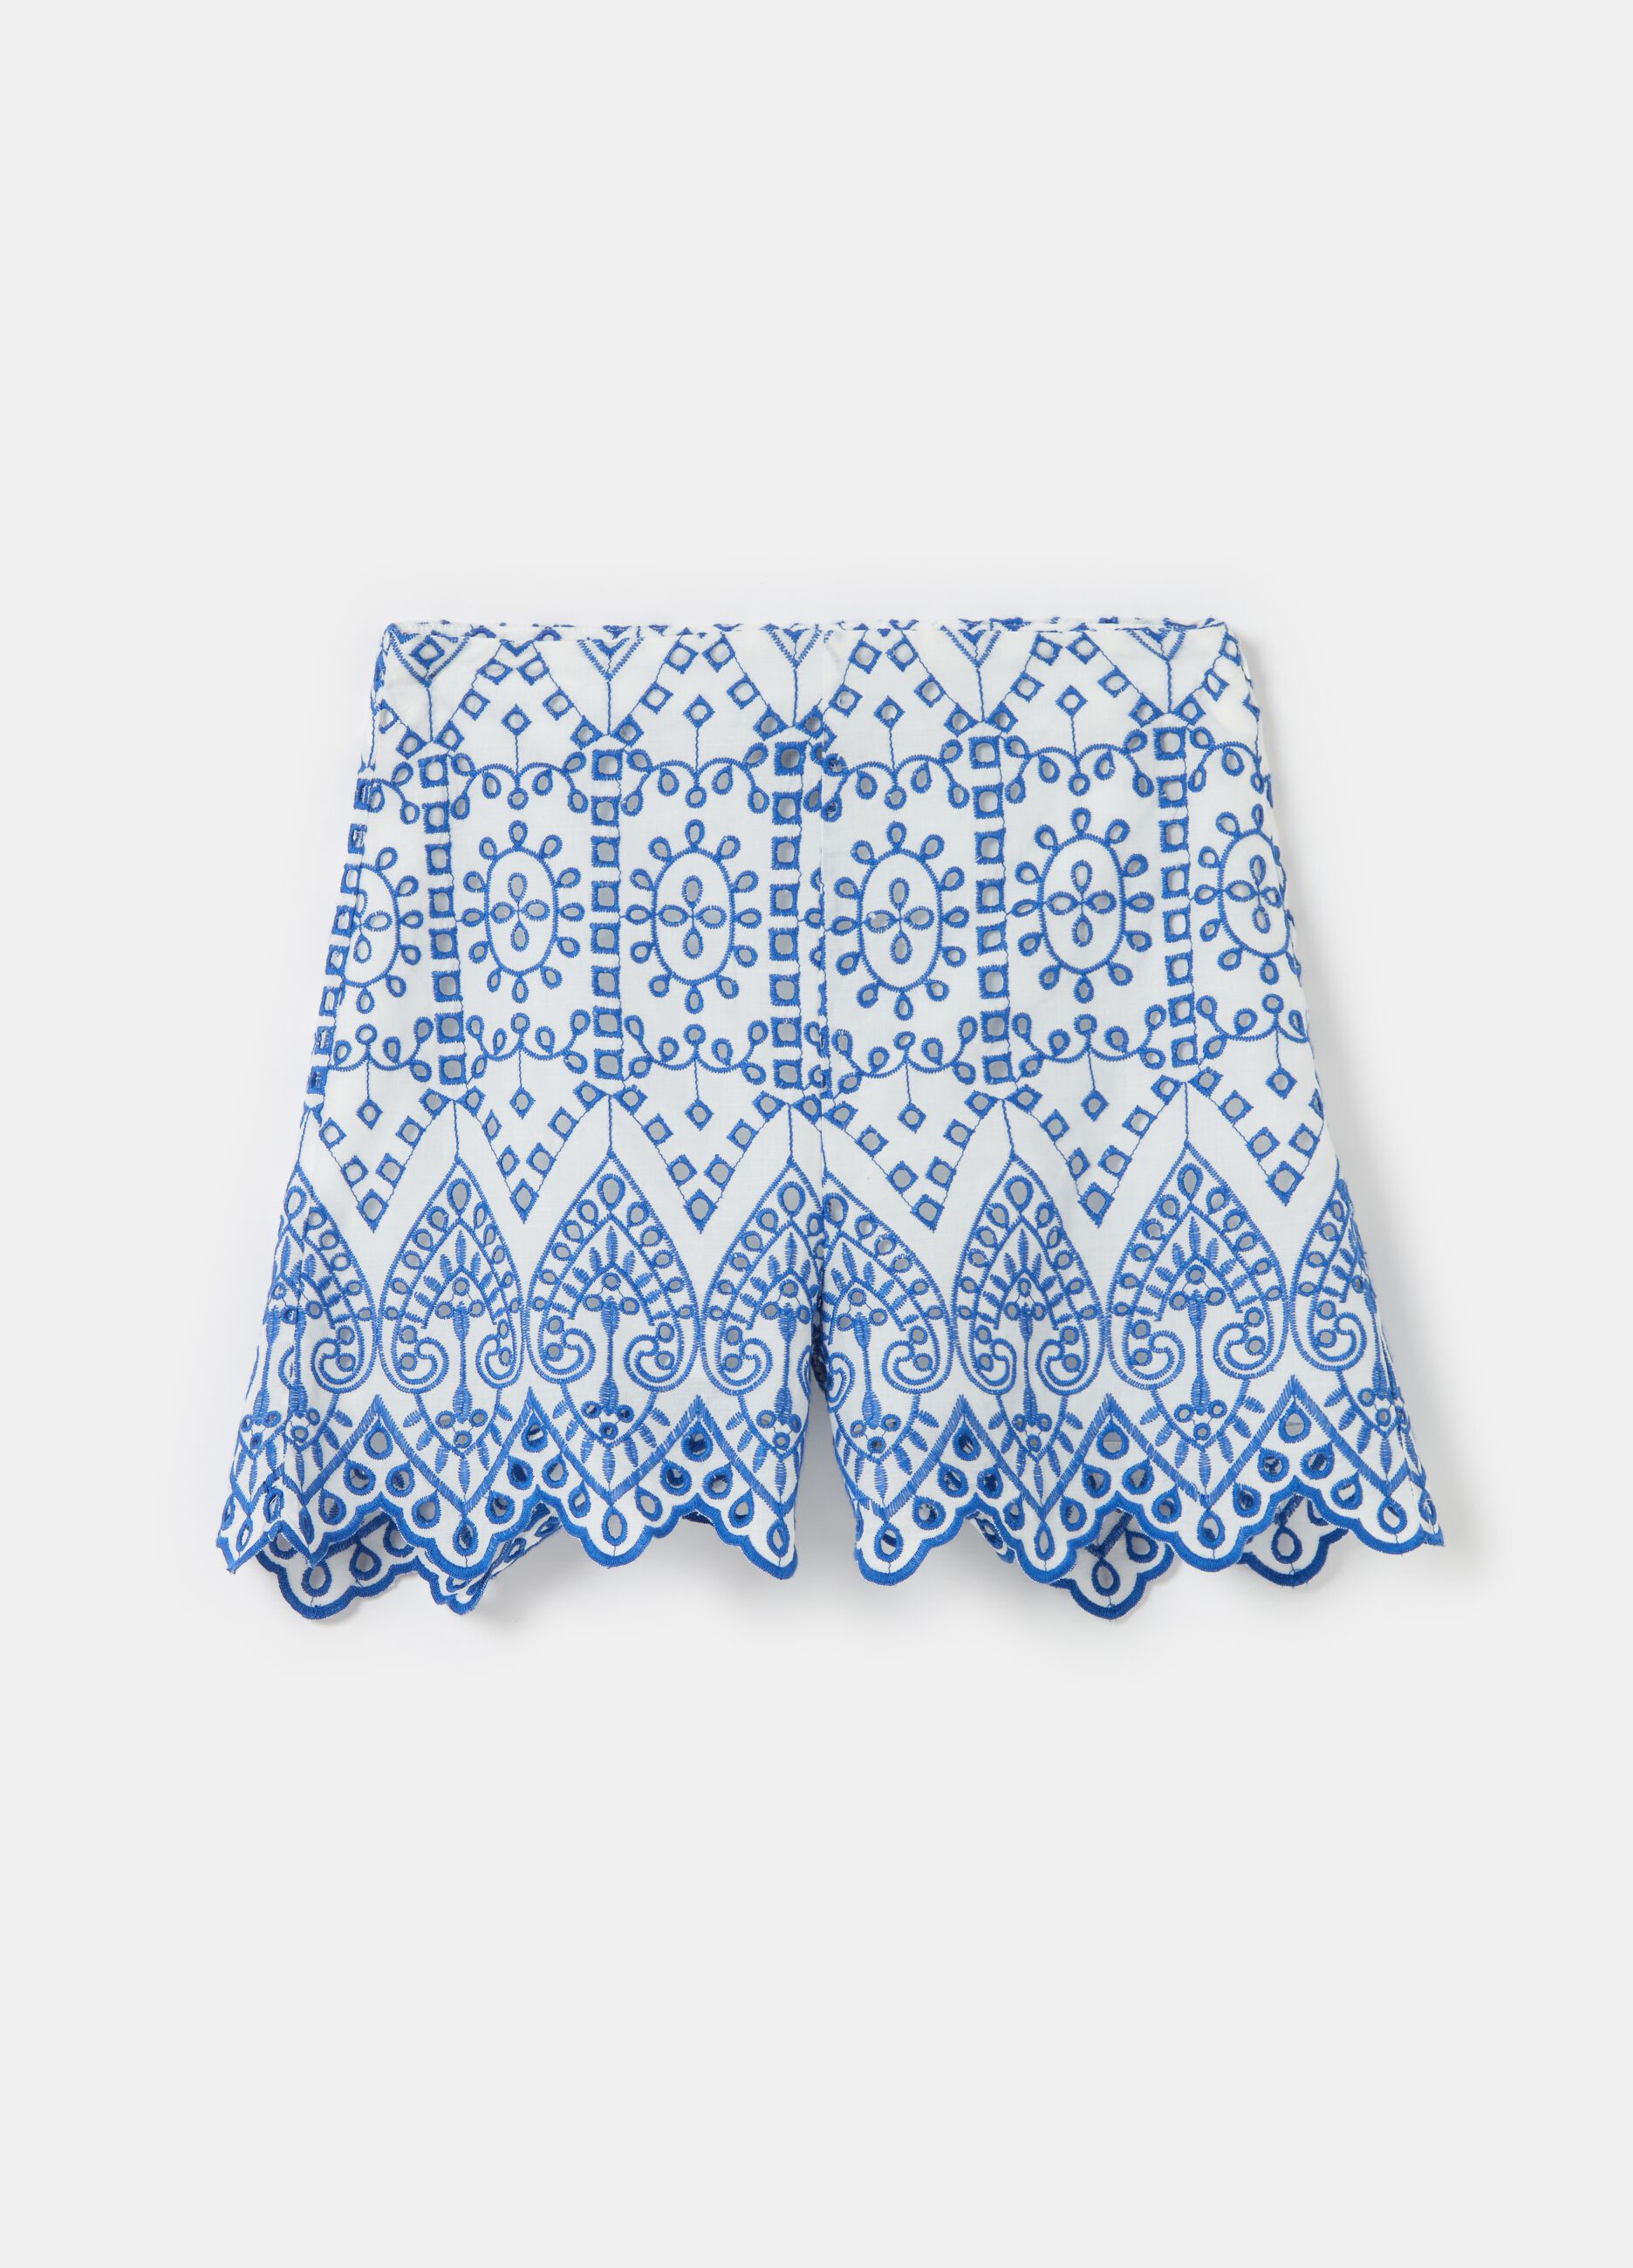 High-rise shorts in broderie anglaise